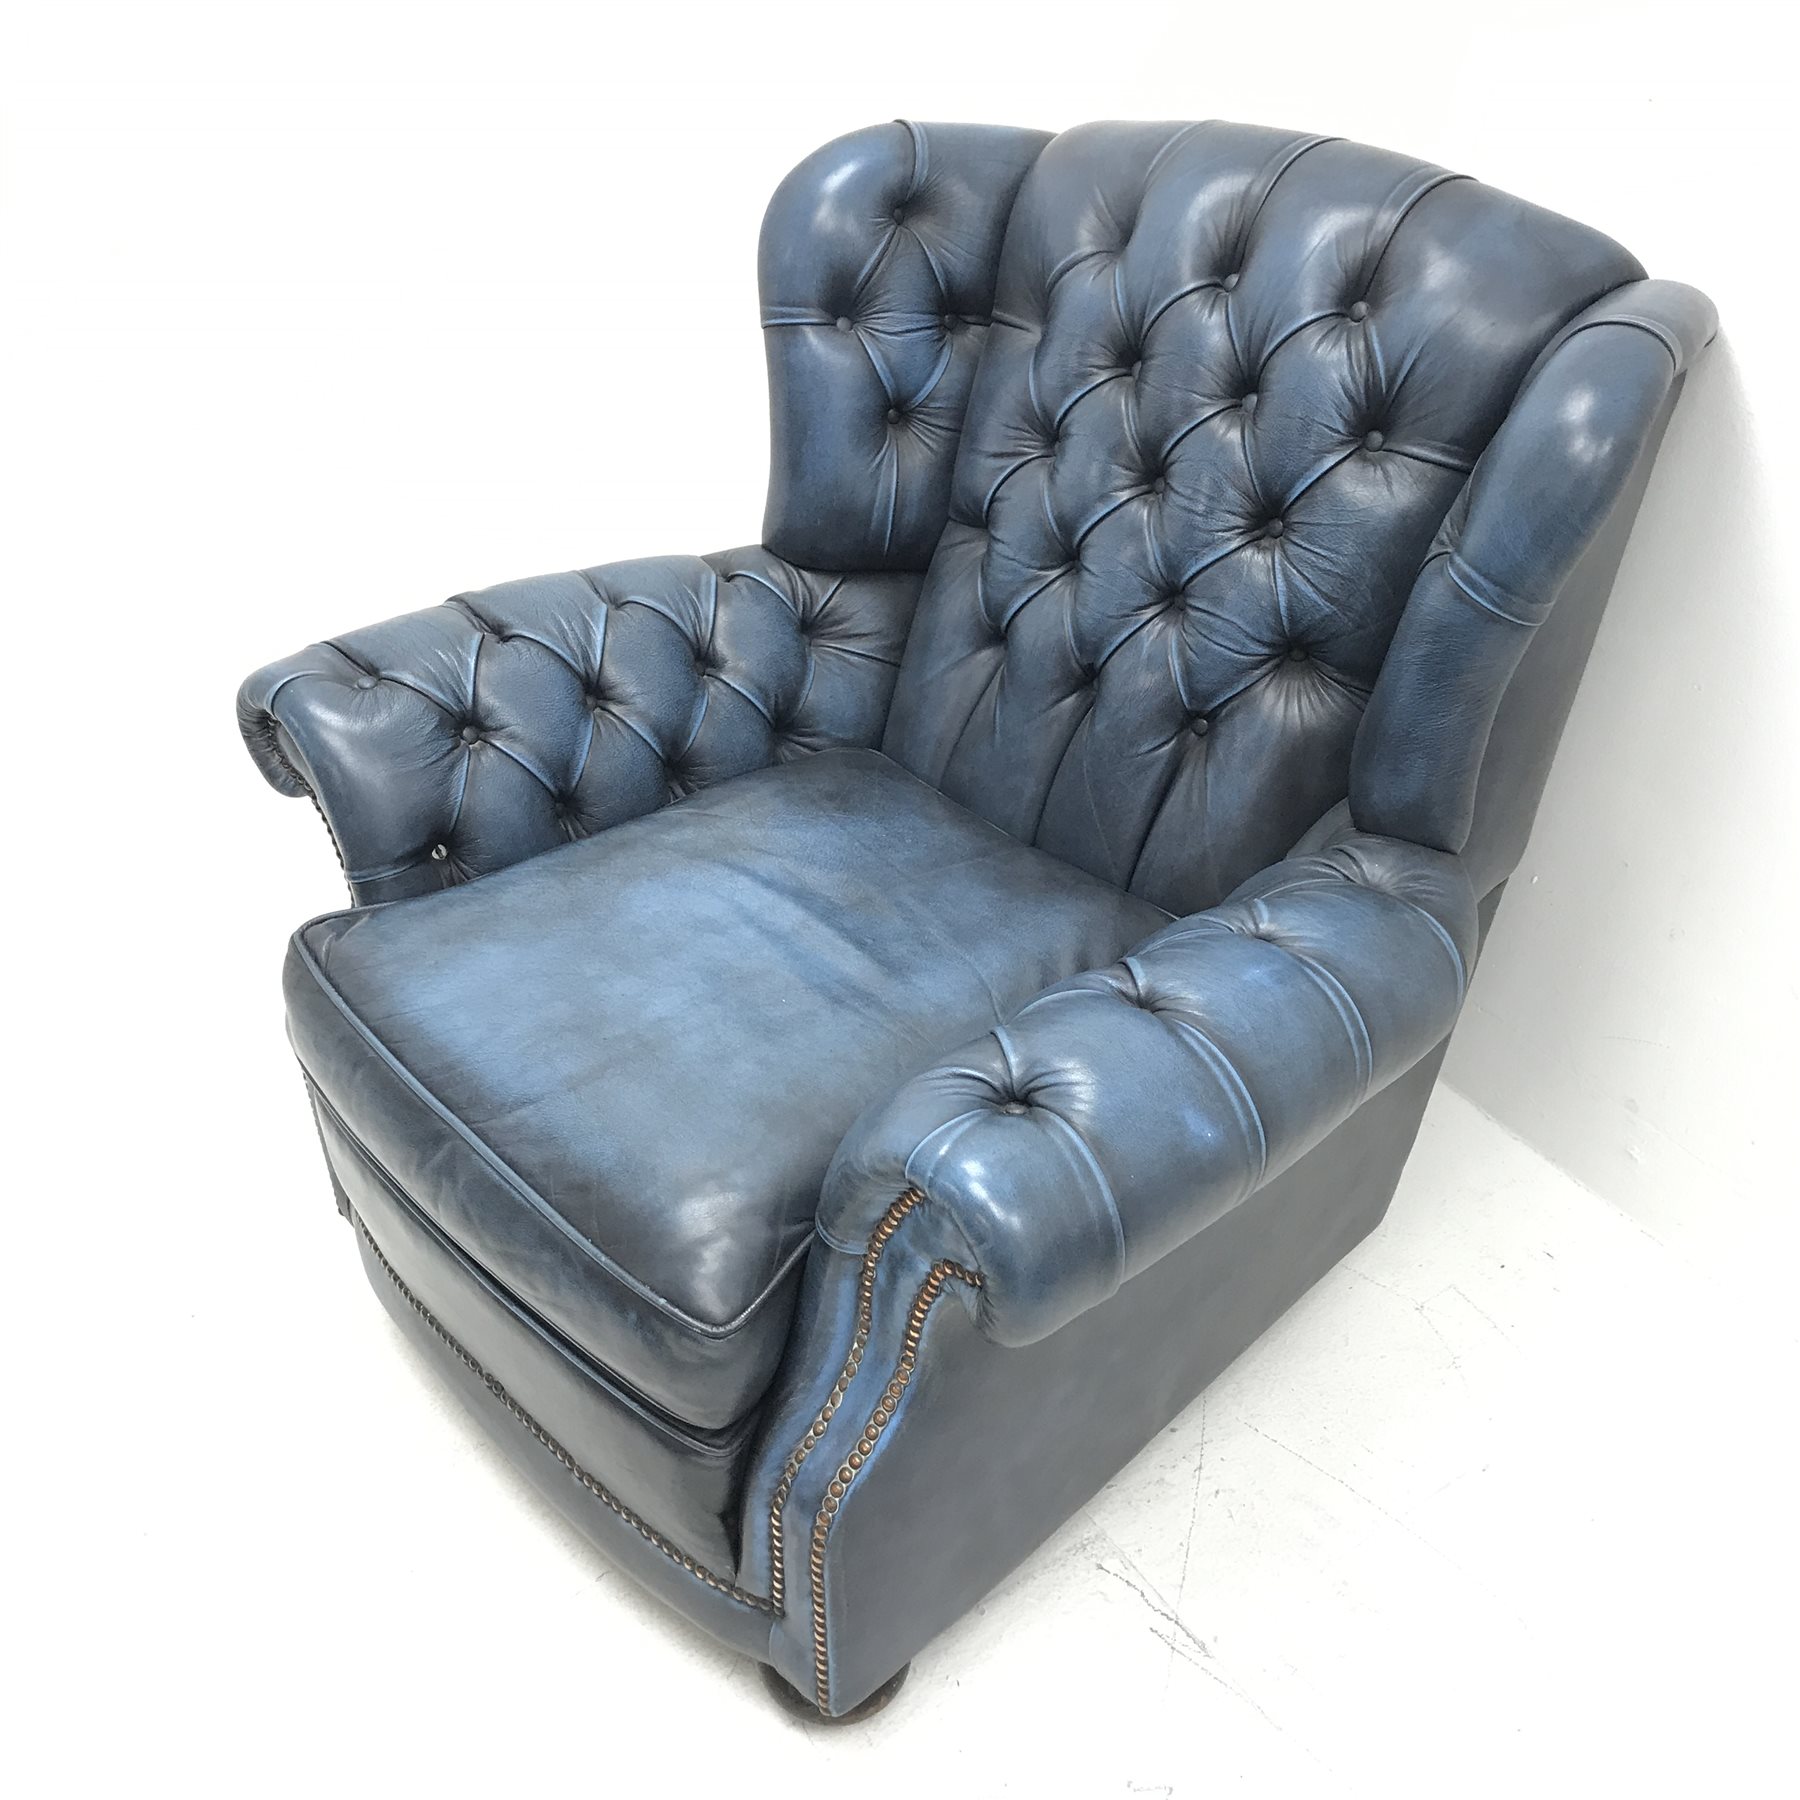 Georgian style wingback armchair upholstered in a deep buttoned blue leather, W91cm - Image 2 of 3